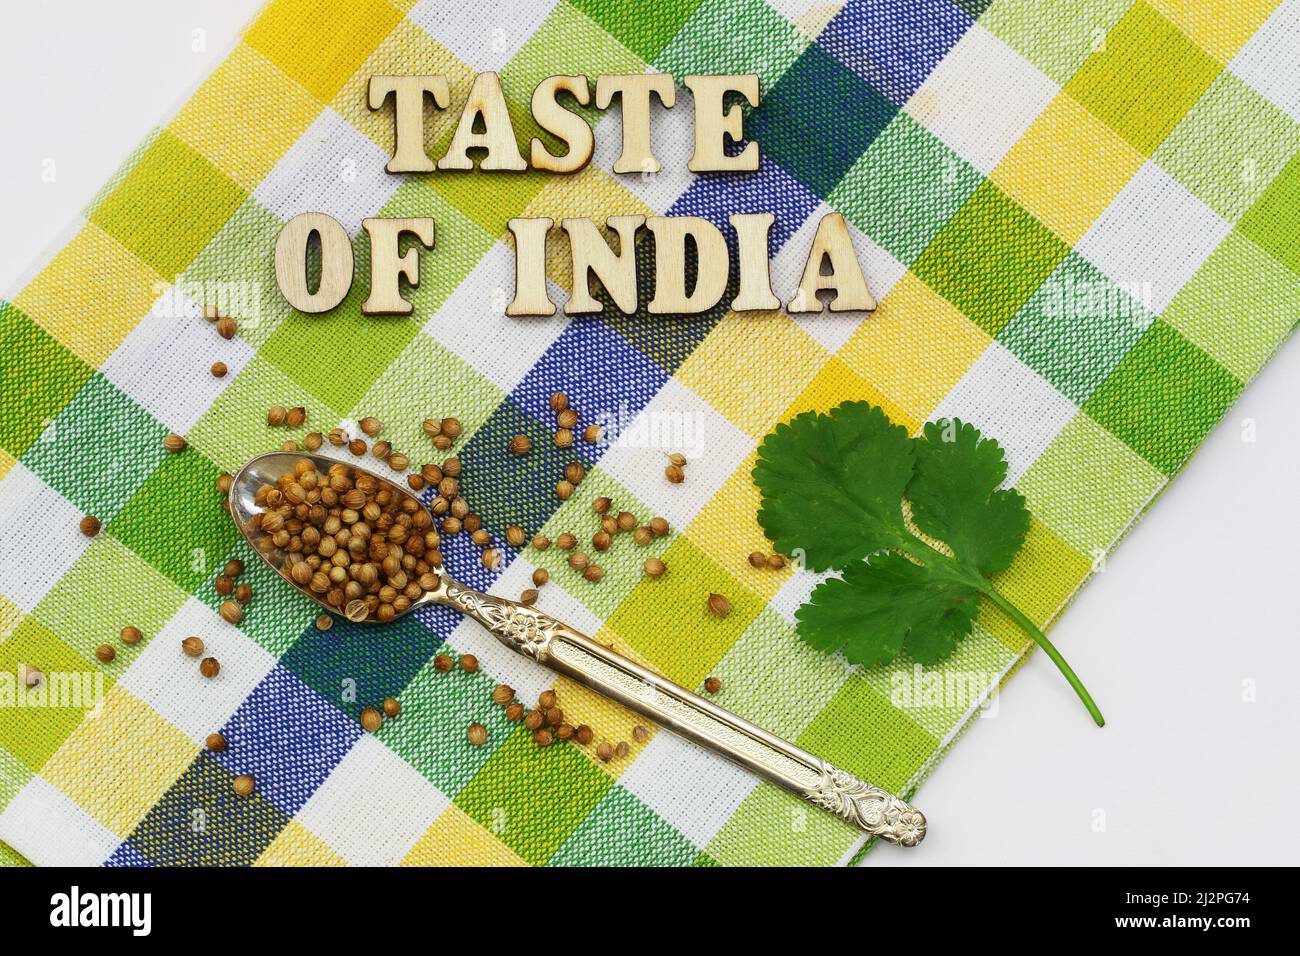 Taste of India written with wooden letters on colorful checkered cloth with fresh coriander leaves and coriander seeds on vintage spoon Stock Photo